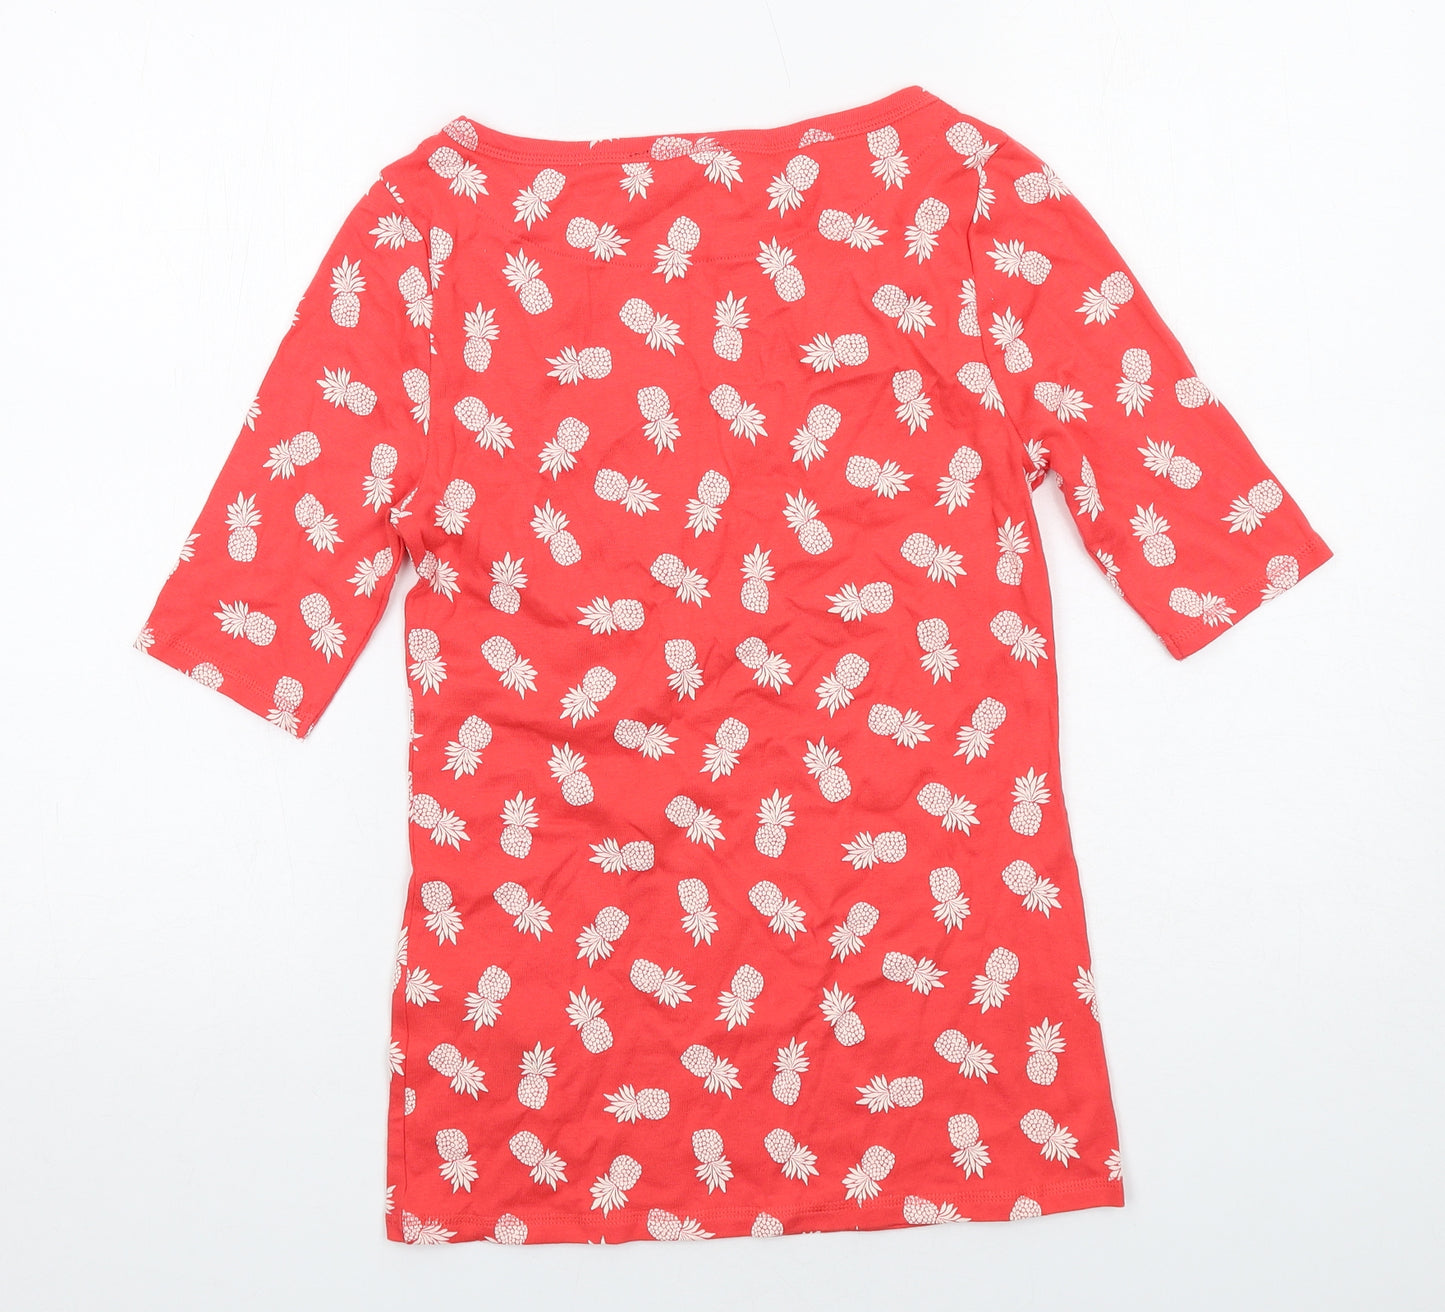 Marks and Spencer Womens Red Geometric Cotton Basic T-Shirt Size 10 Boat Neck - Pineapple Print